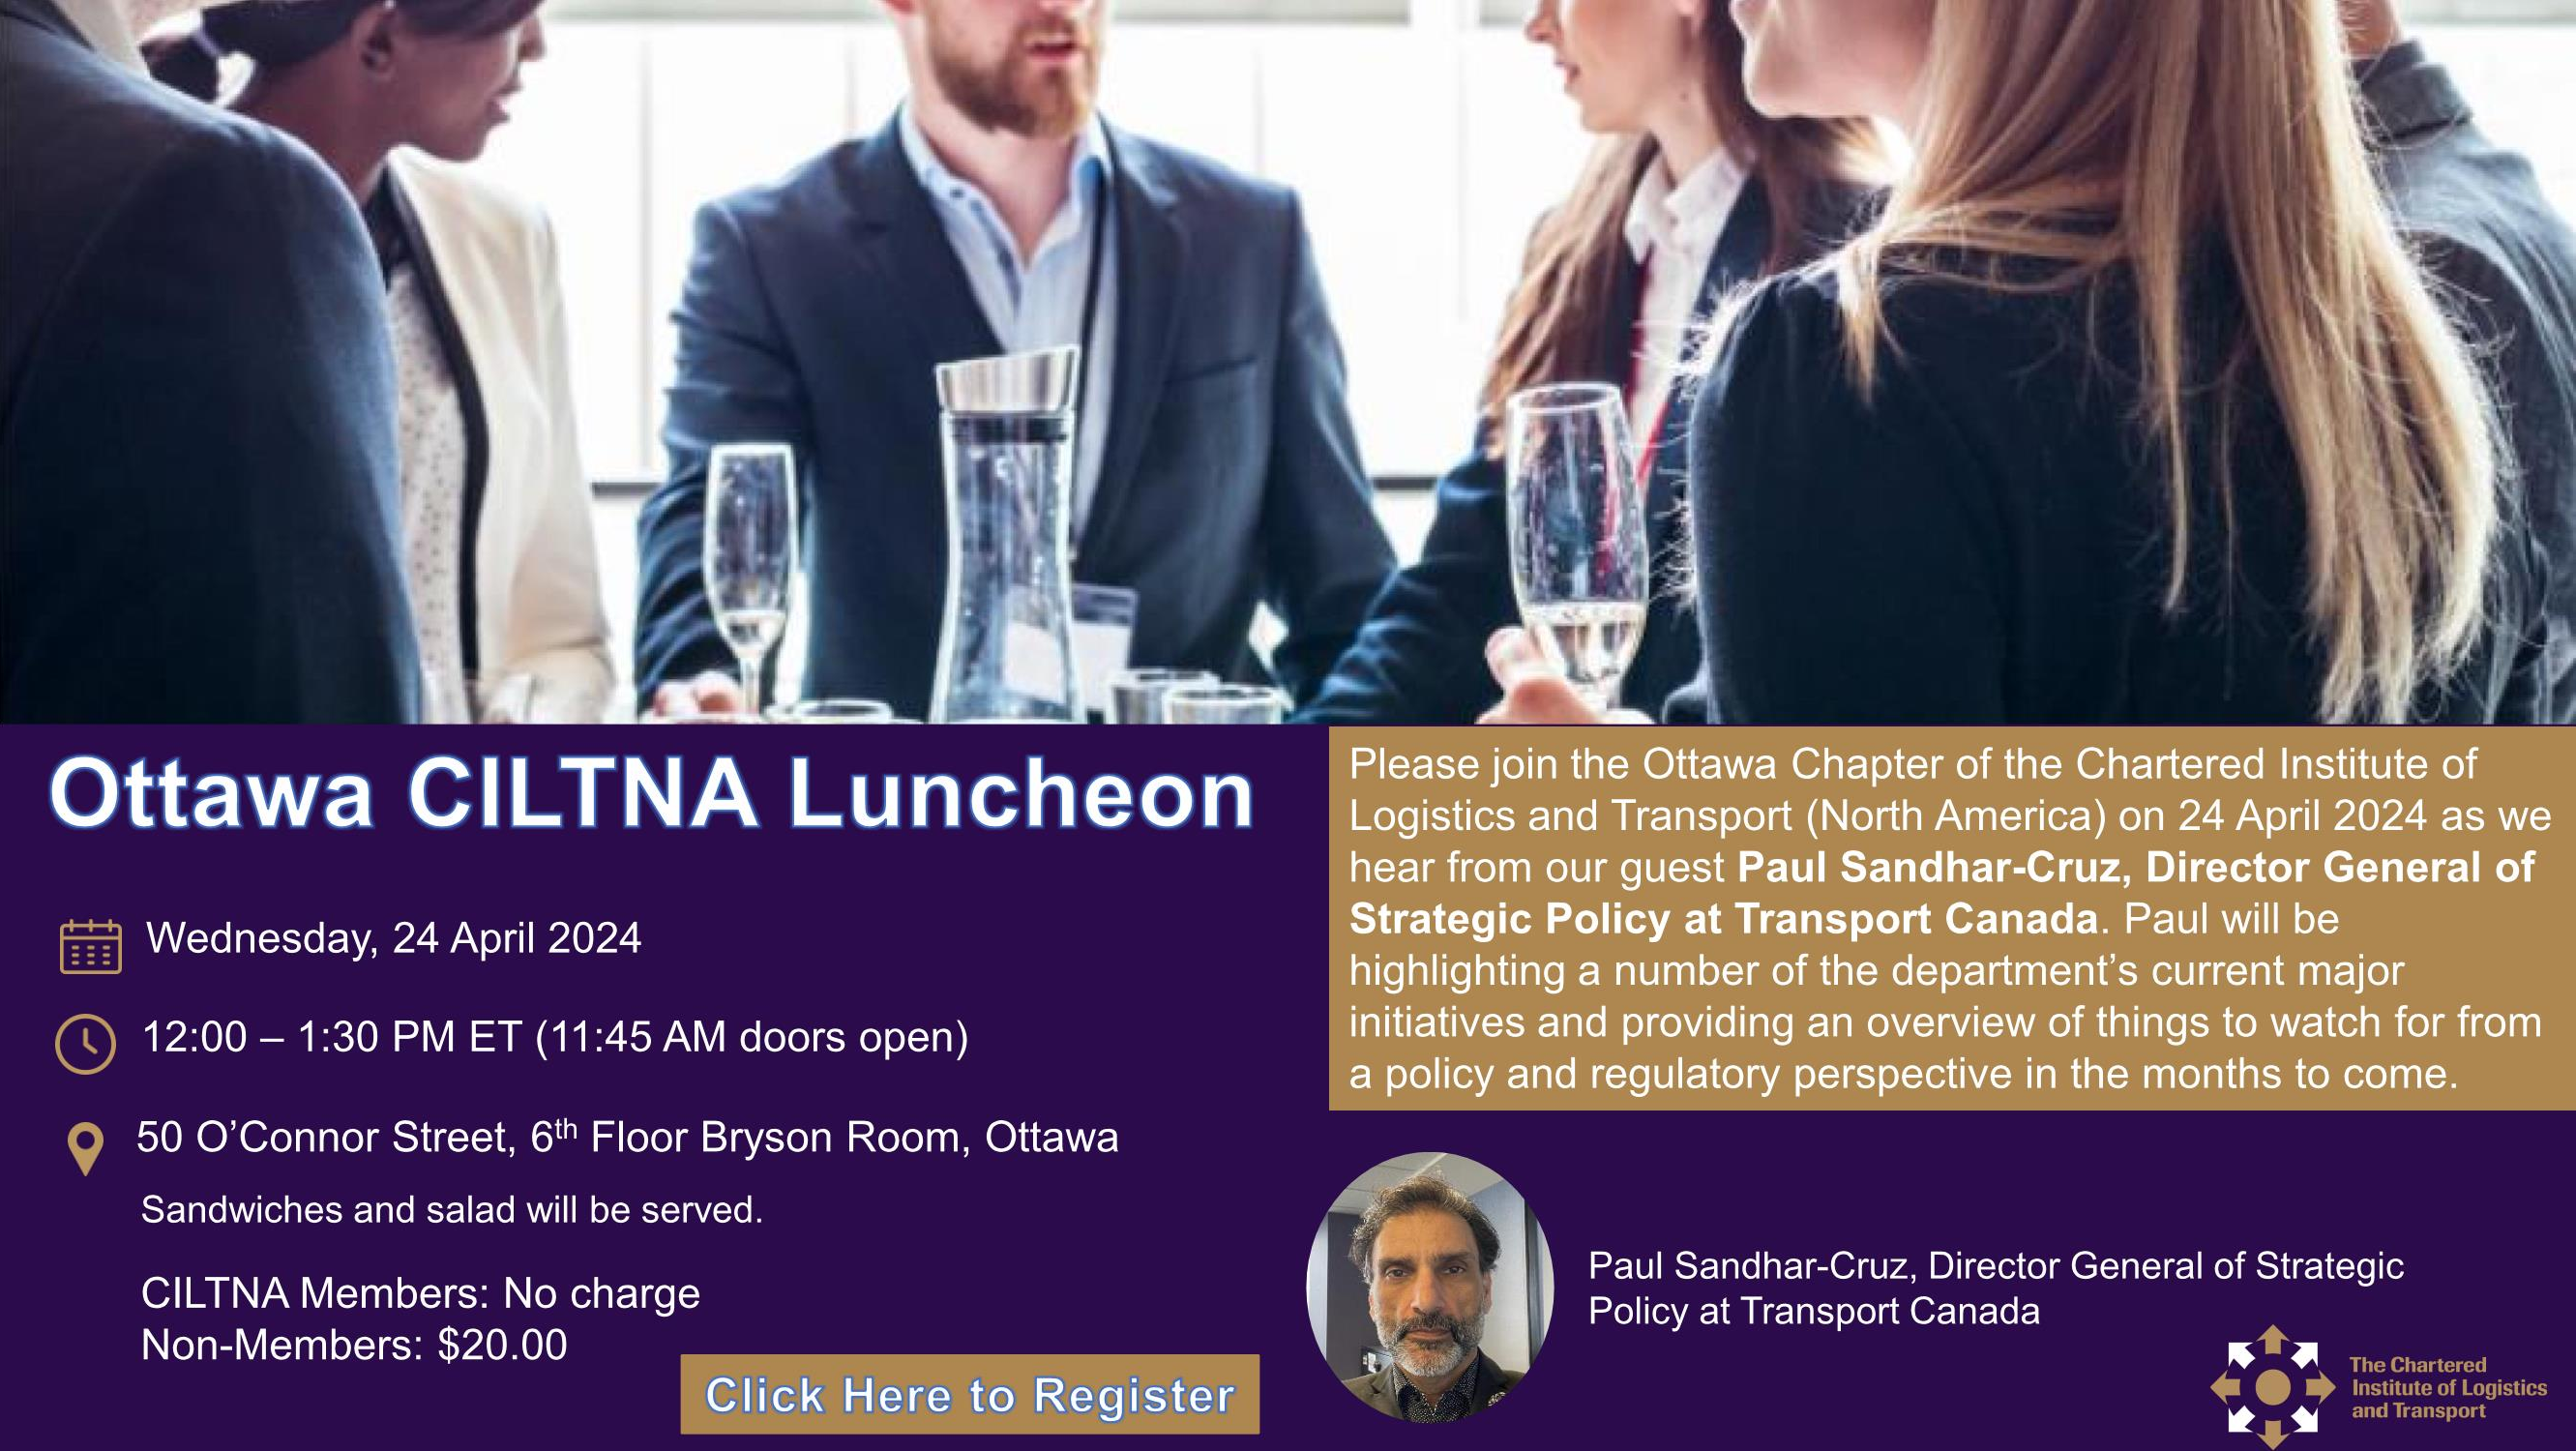 24 April 2024 - Ottawa CILTNA Luncheon with guest speaker Paul Sandhar-Cruz, Director General of Strategic Policy at Transport Canada